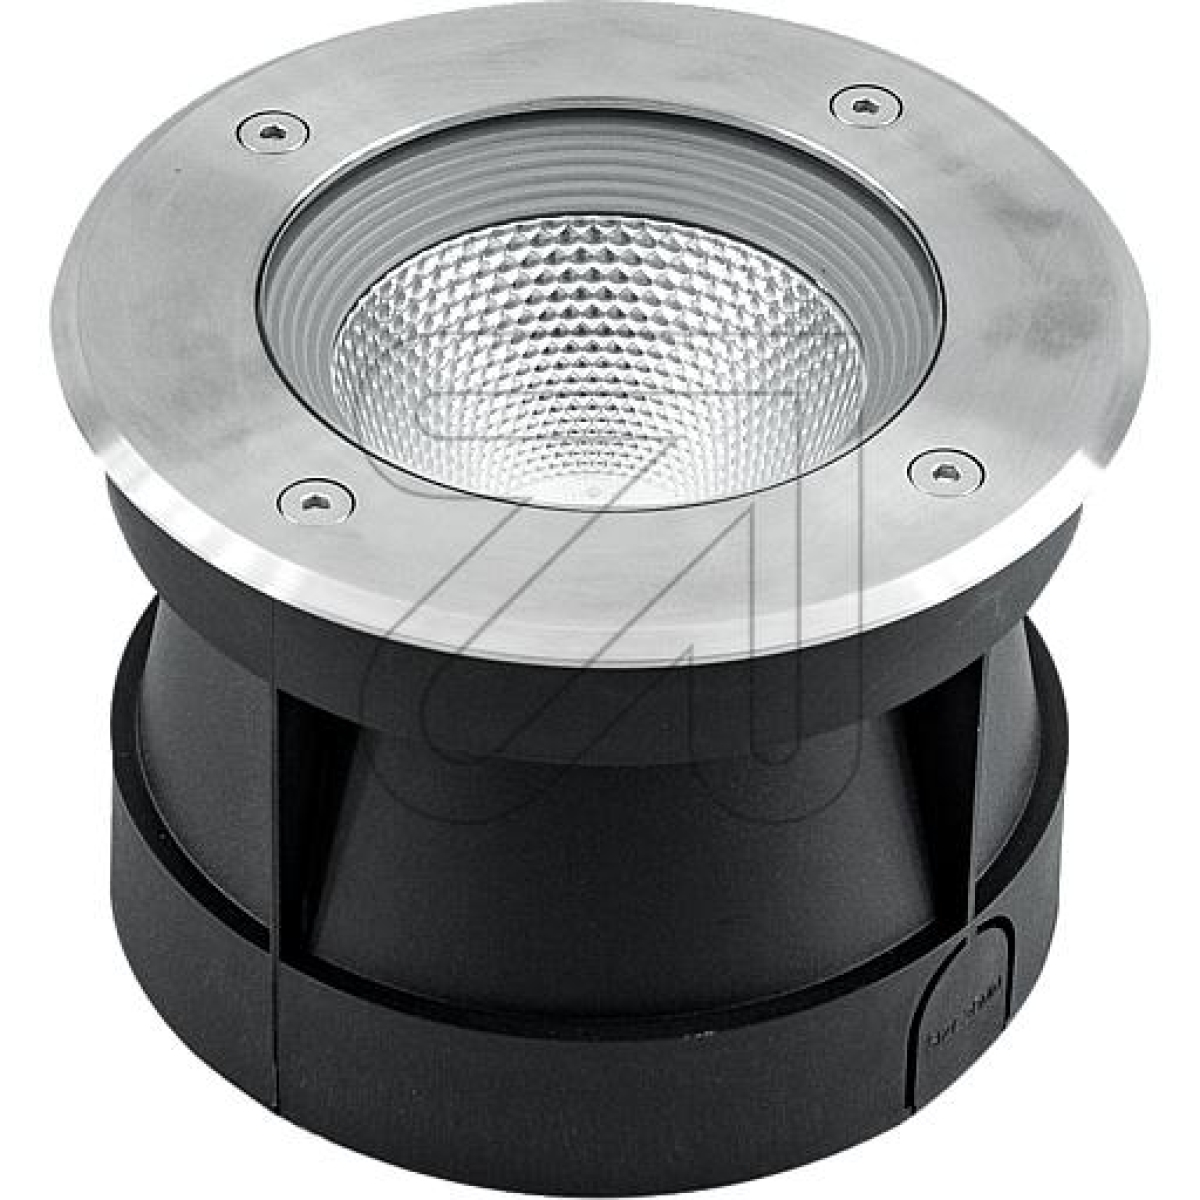 EVNLED recessed floor spotlight IP67, 12W 3000K, stainless steel 230V, beam angle 38°, stainless steel/aluminum, PC67101202MArticle-No: 683875